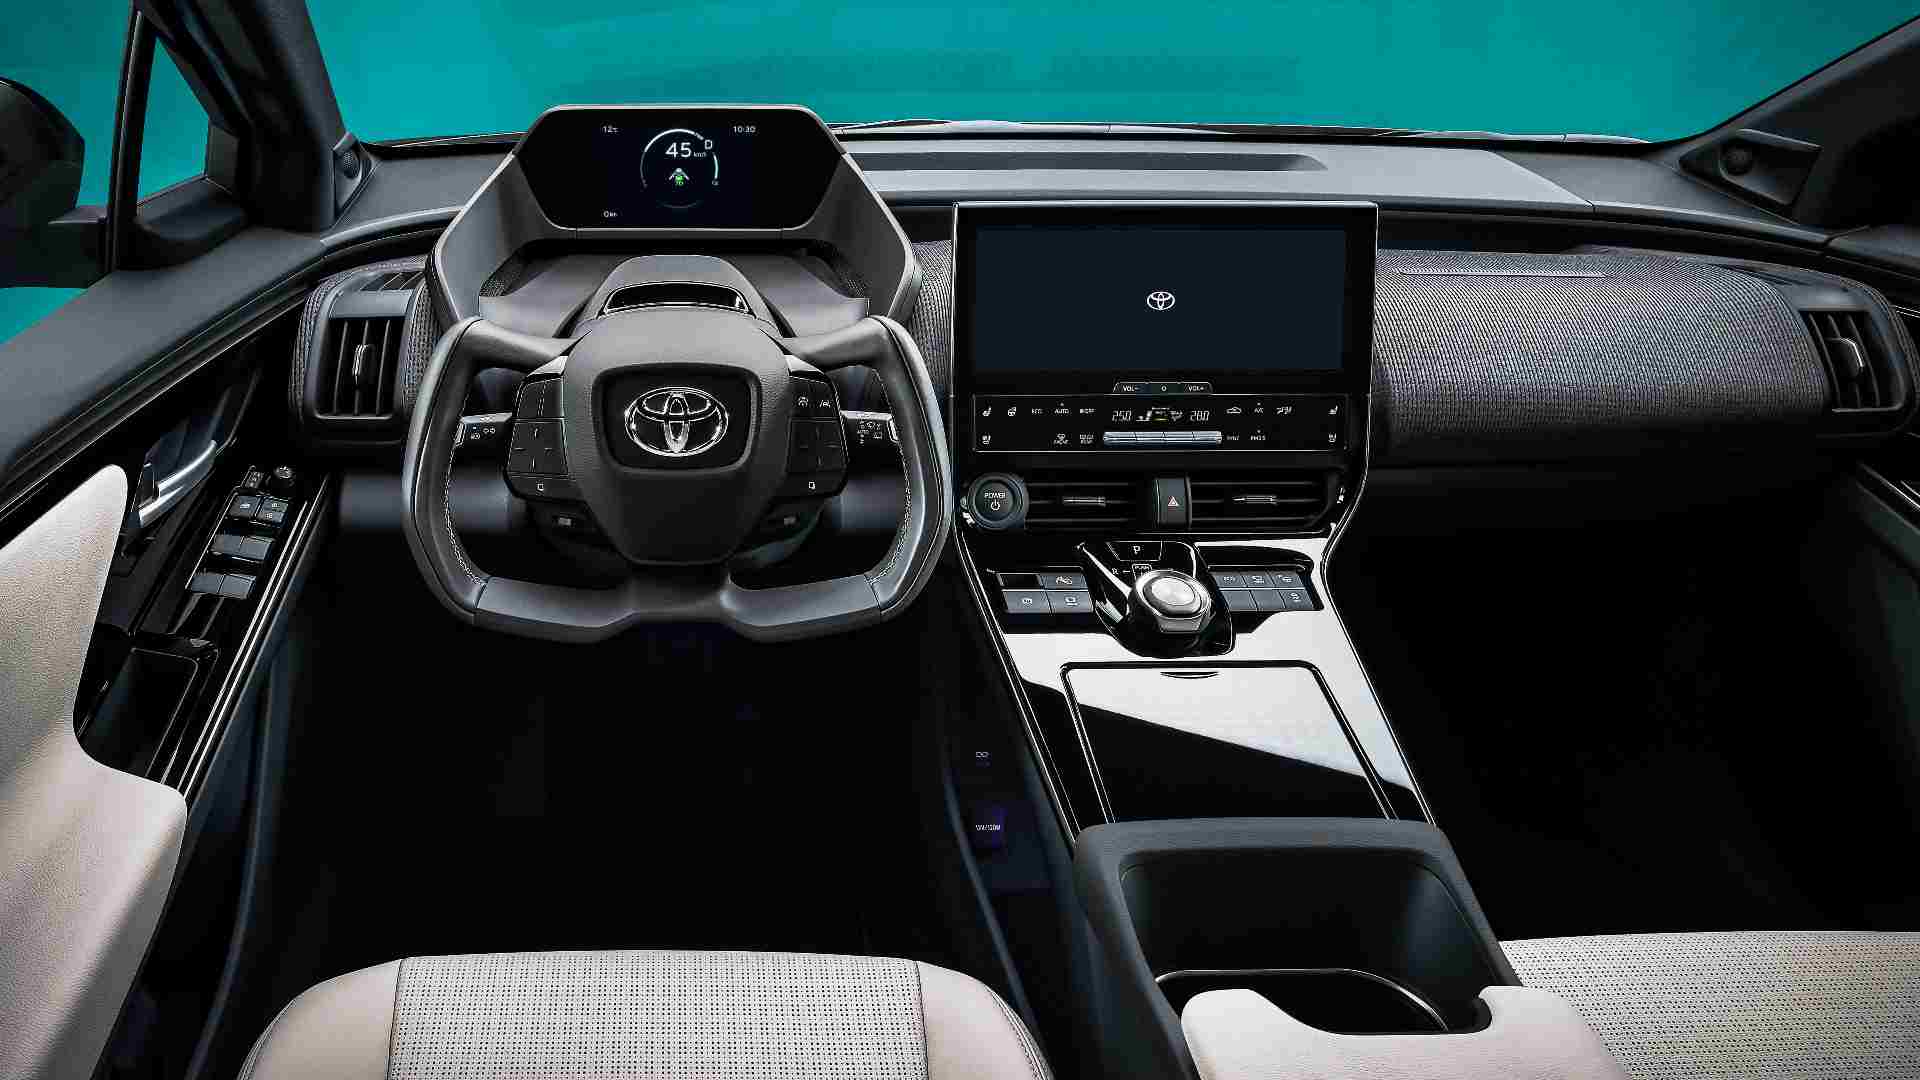 Tesla-like aircraft yoke-style steering wheel a highlight of the Toyota bZ4x concept's interior. Image: Toyota